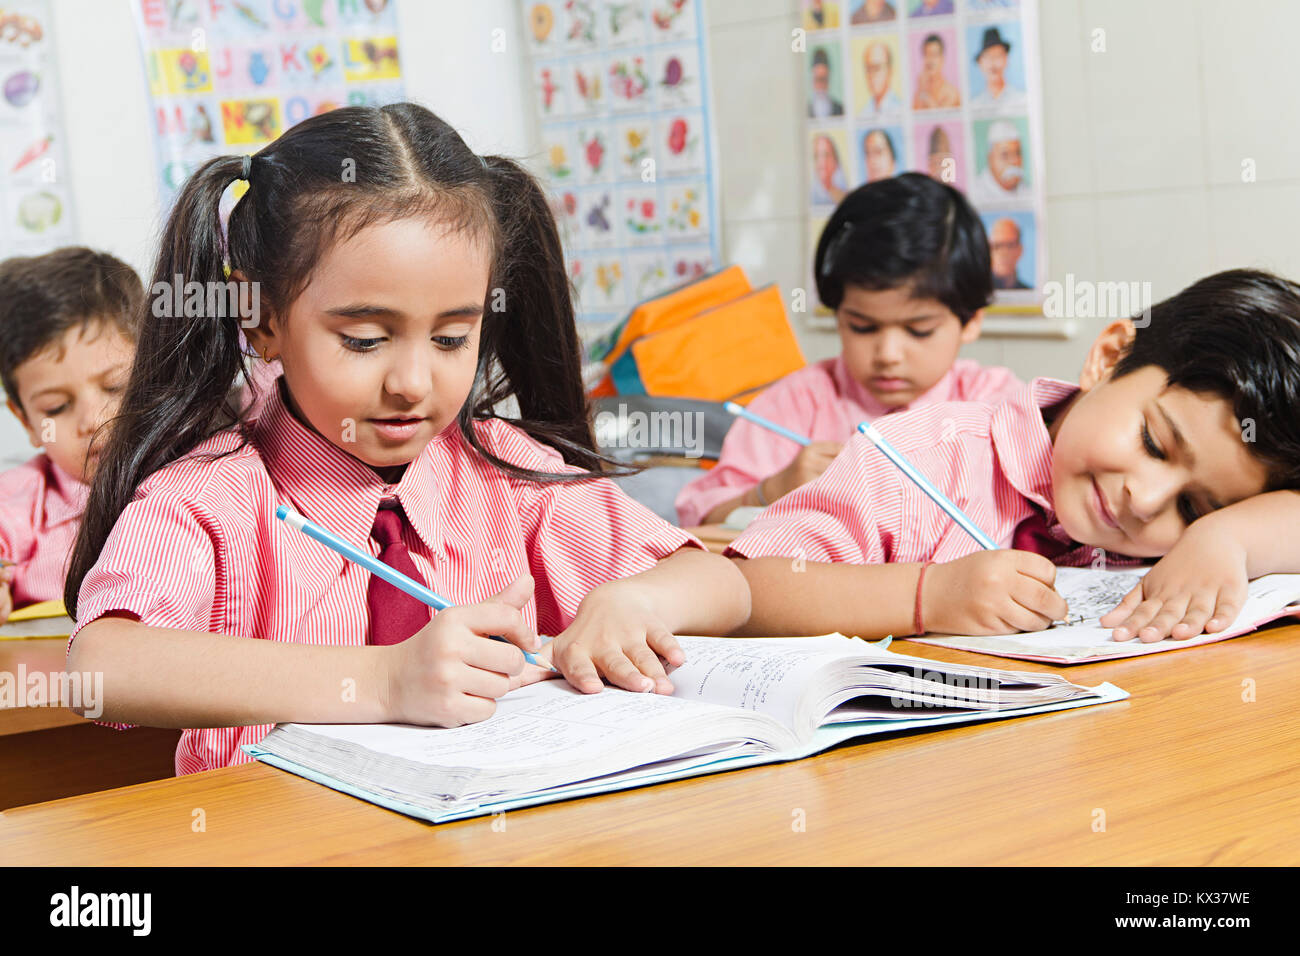 Indian School Children Students Book Study Education Learning in Classroom Stock Photo